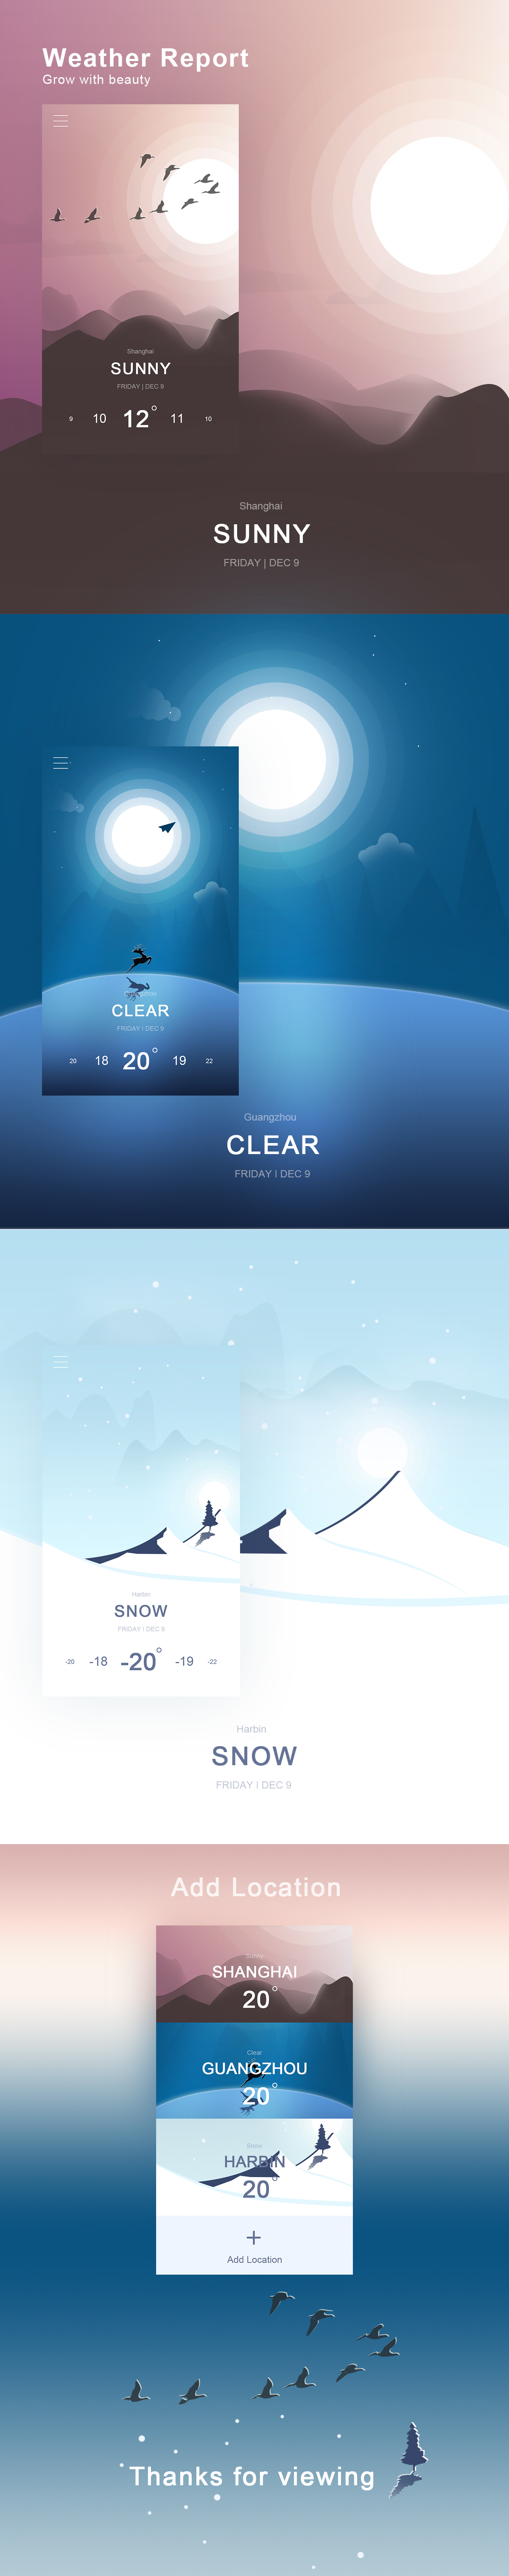 weather report ILLUSTRATION  application app UI user interface ux